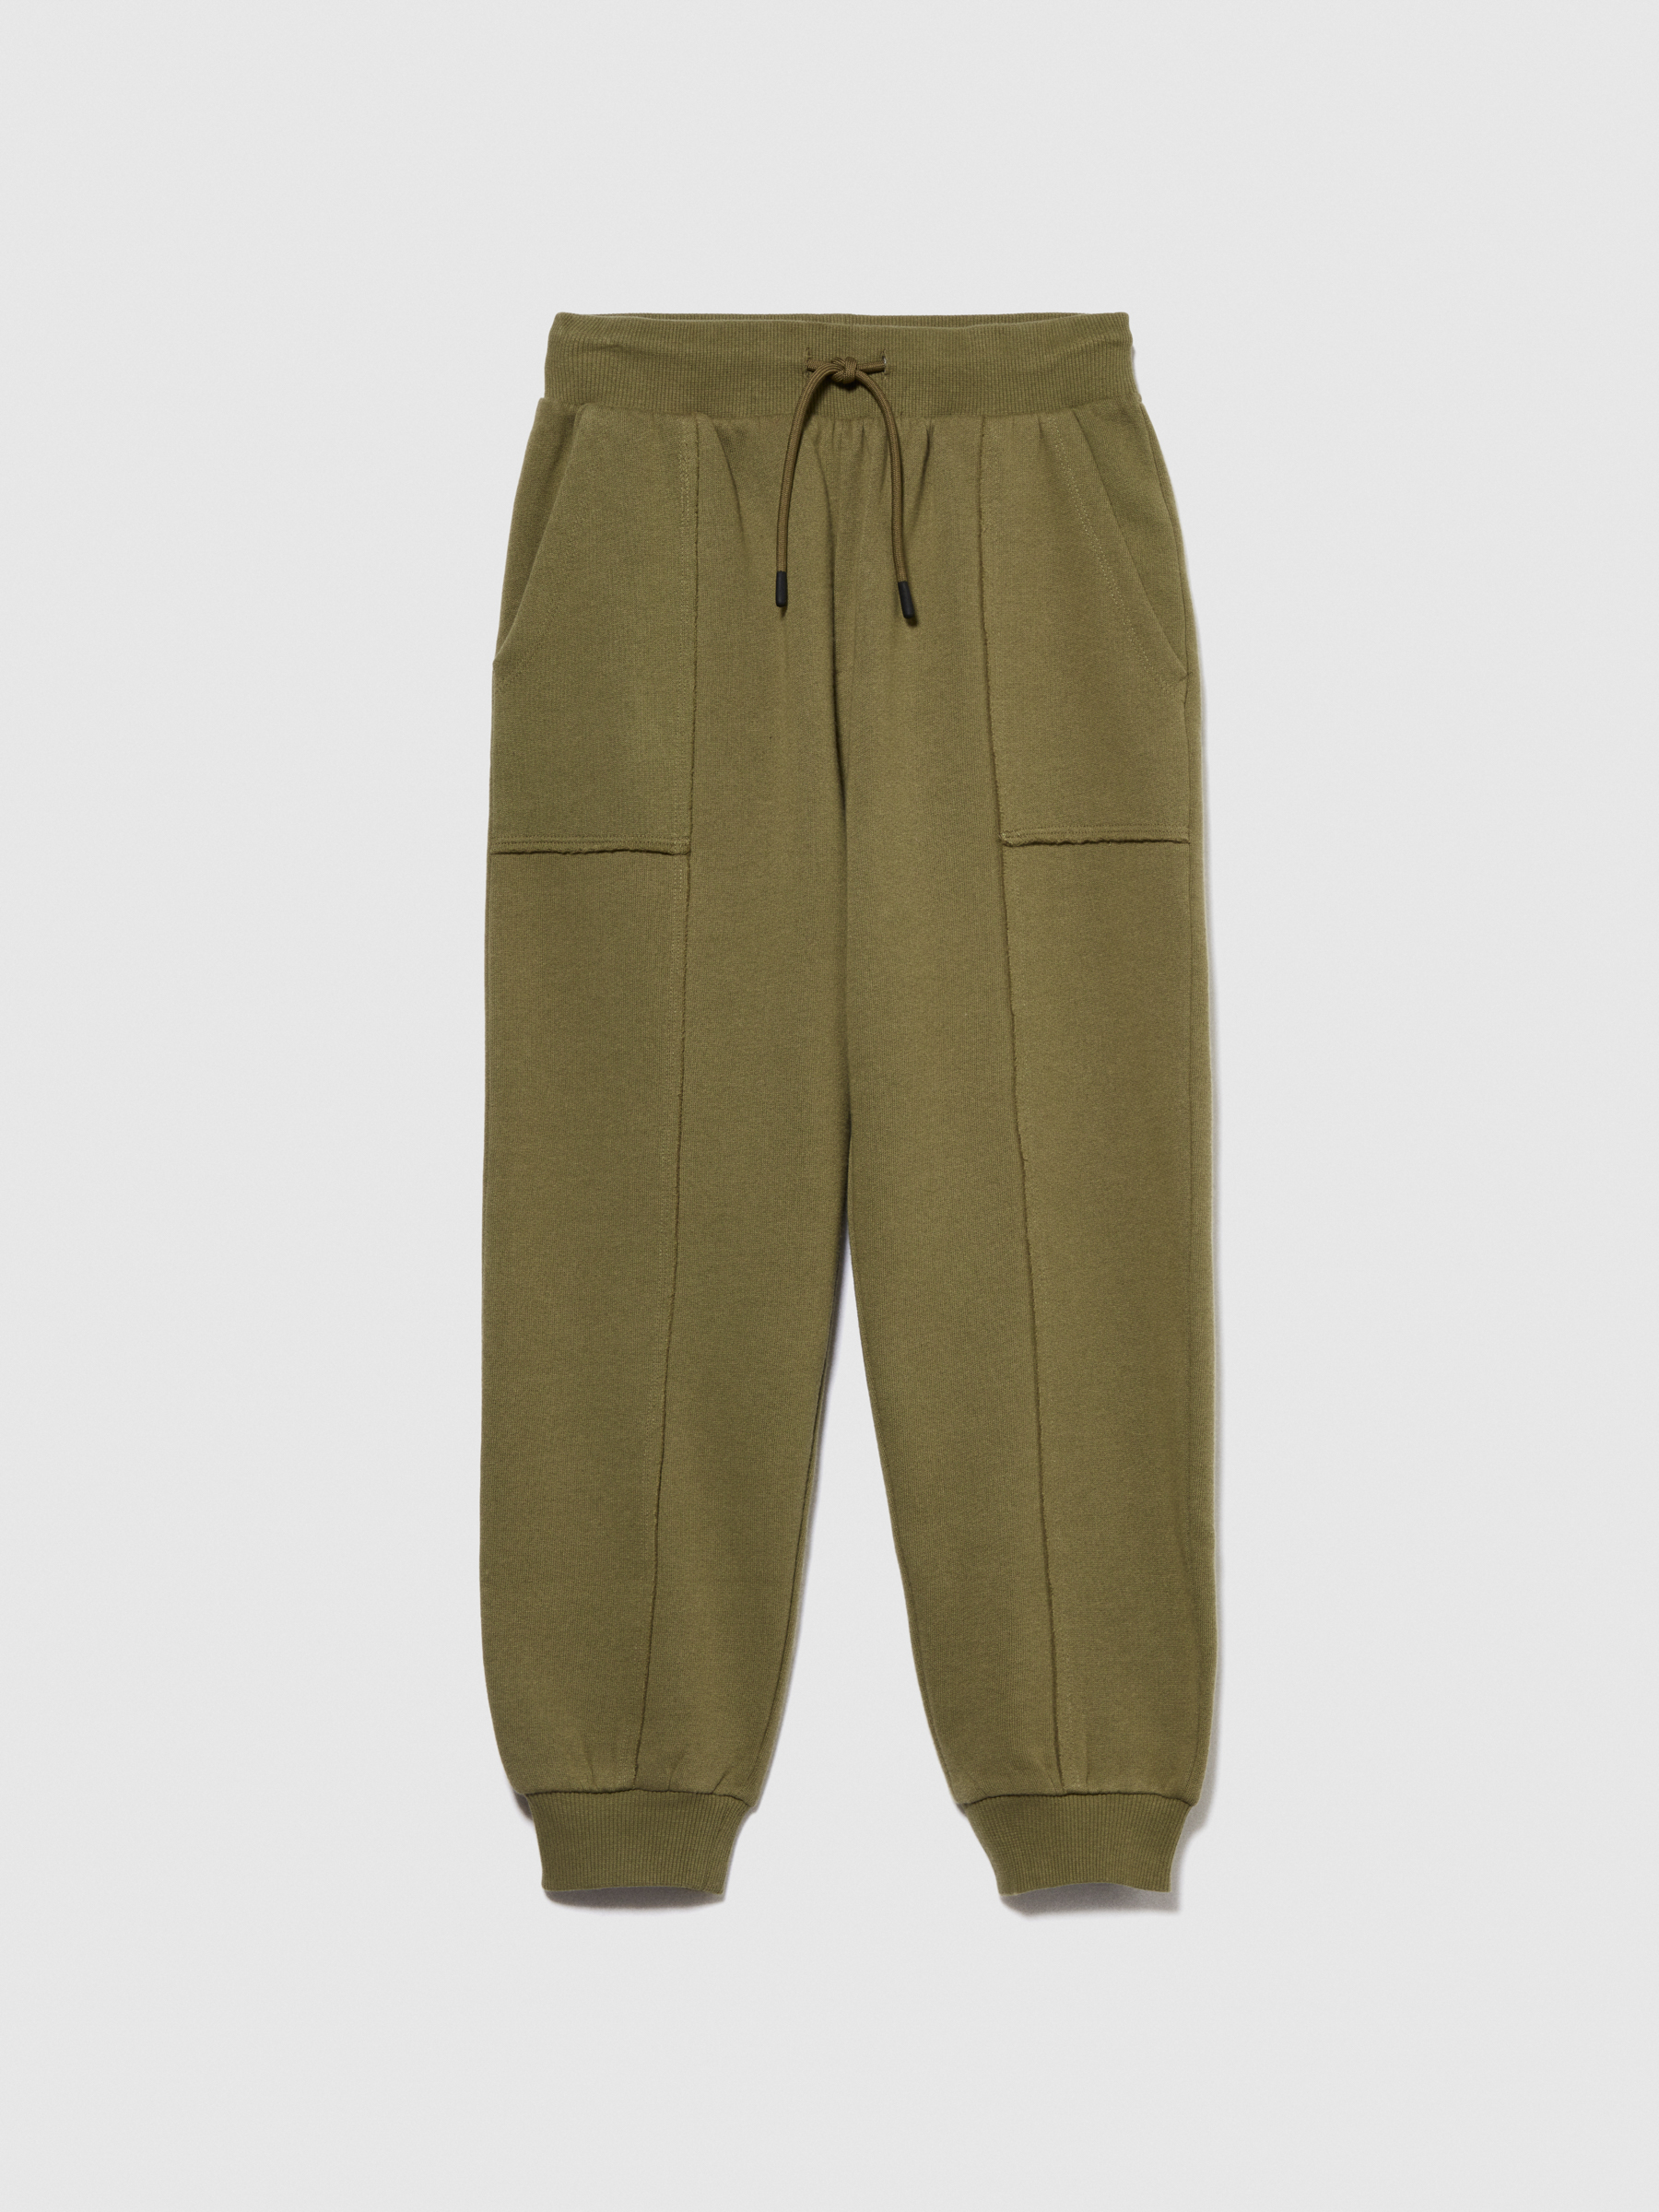 Sisley Young - Oversized Sweat Joggers, Man, Military Green, Size: S